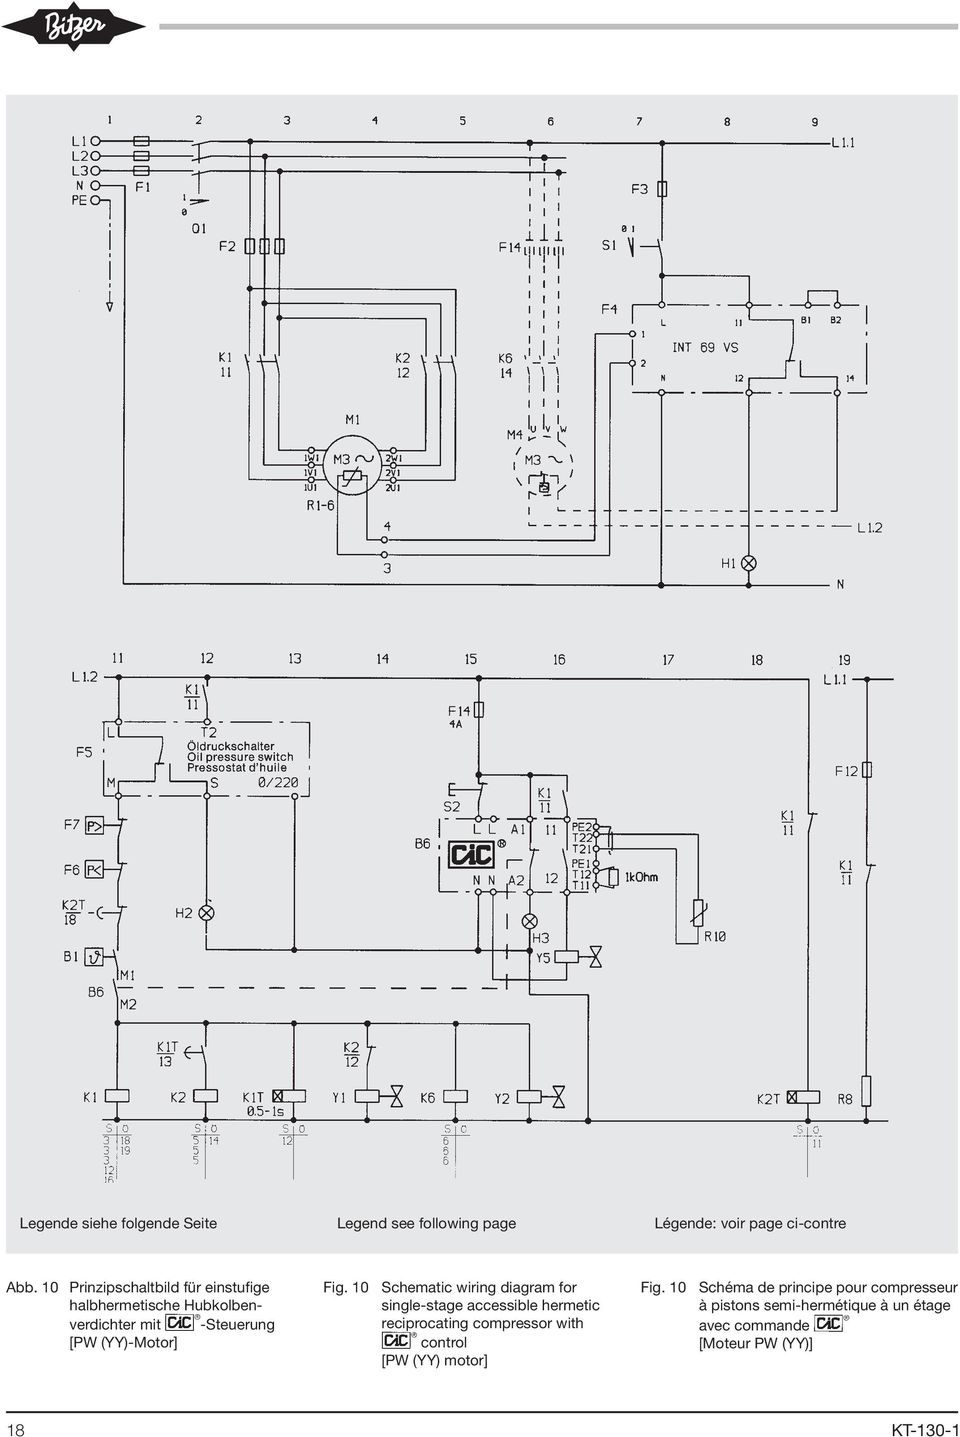 10 Schematic wiring diagram for single-stage accessible hermetic reciprocating compressor with control [PW